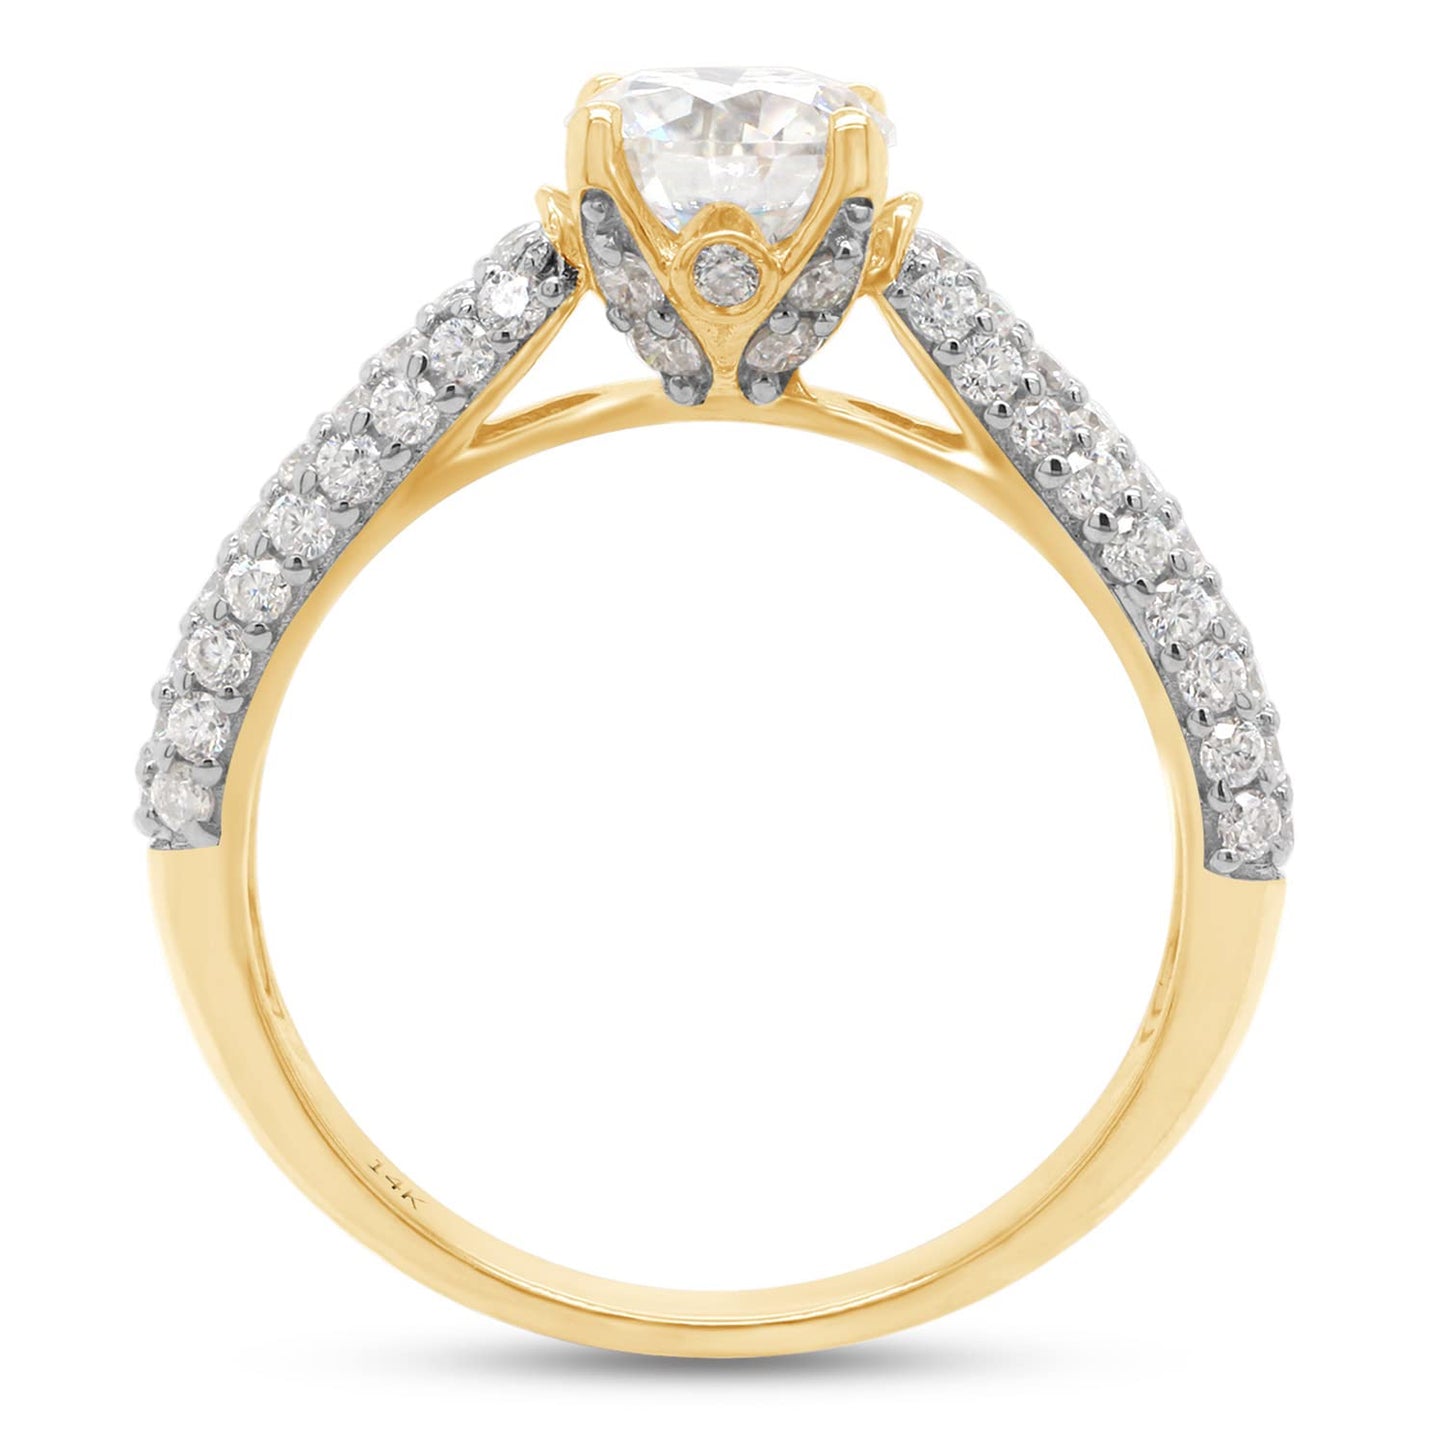 Load image into Gallery viewer, 1 1/2 Carat Round Cut Lab Created Moissanite Diamond 3-Row Solitaire Engagement Wedding Ring in 10K or 14K Solid Gold (1.50 Cttw)
